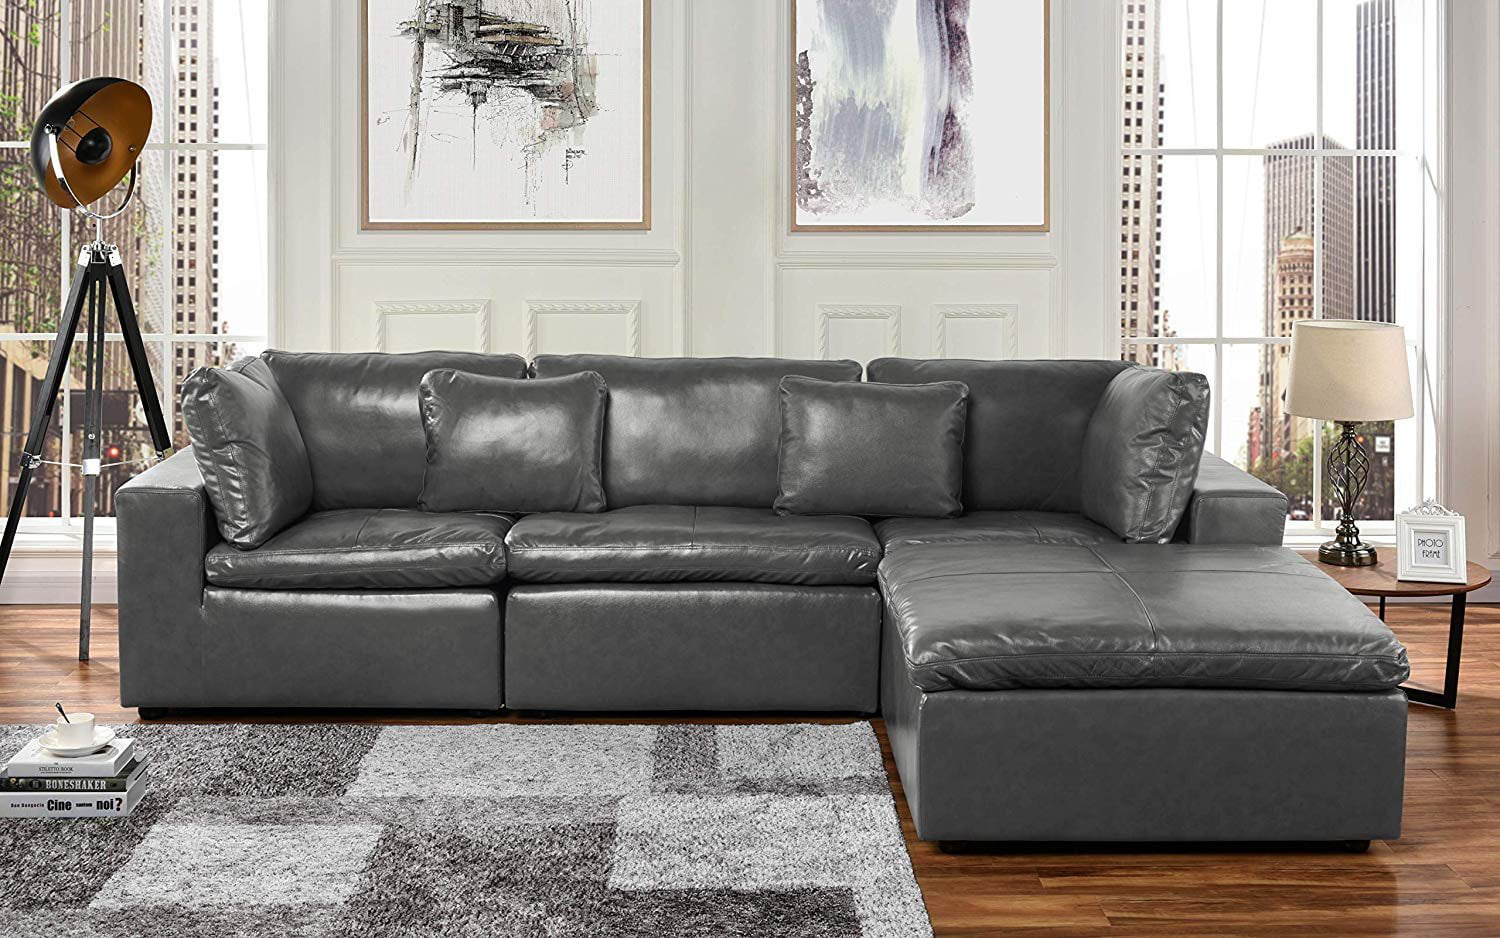 Large Leather Sectional Sofa, L Shape Couch with Wide ...